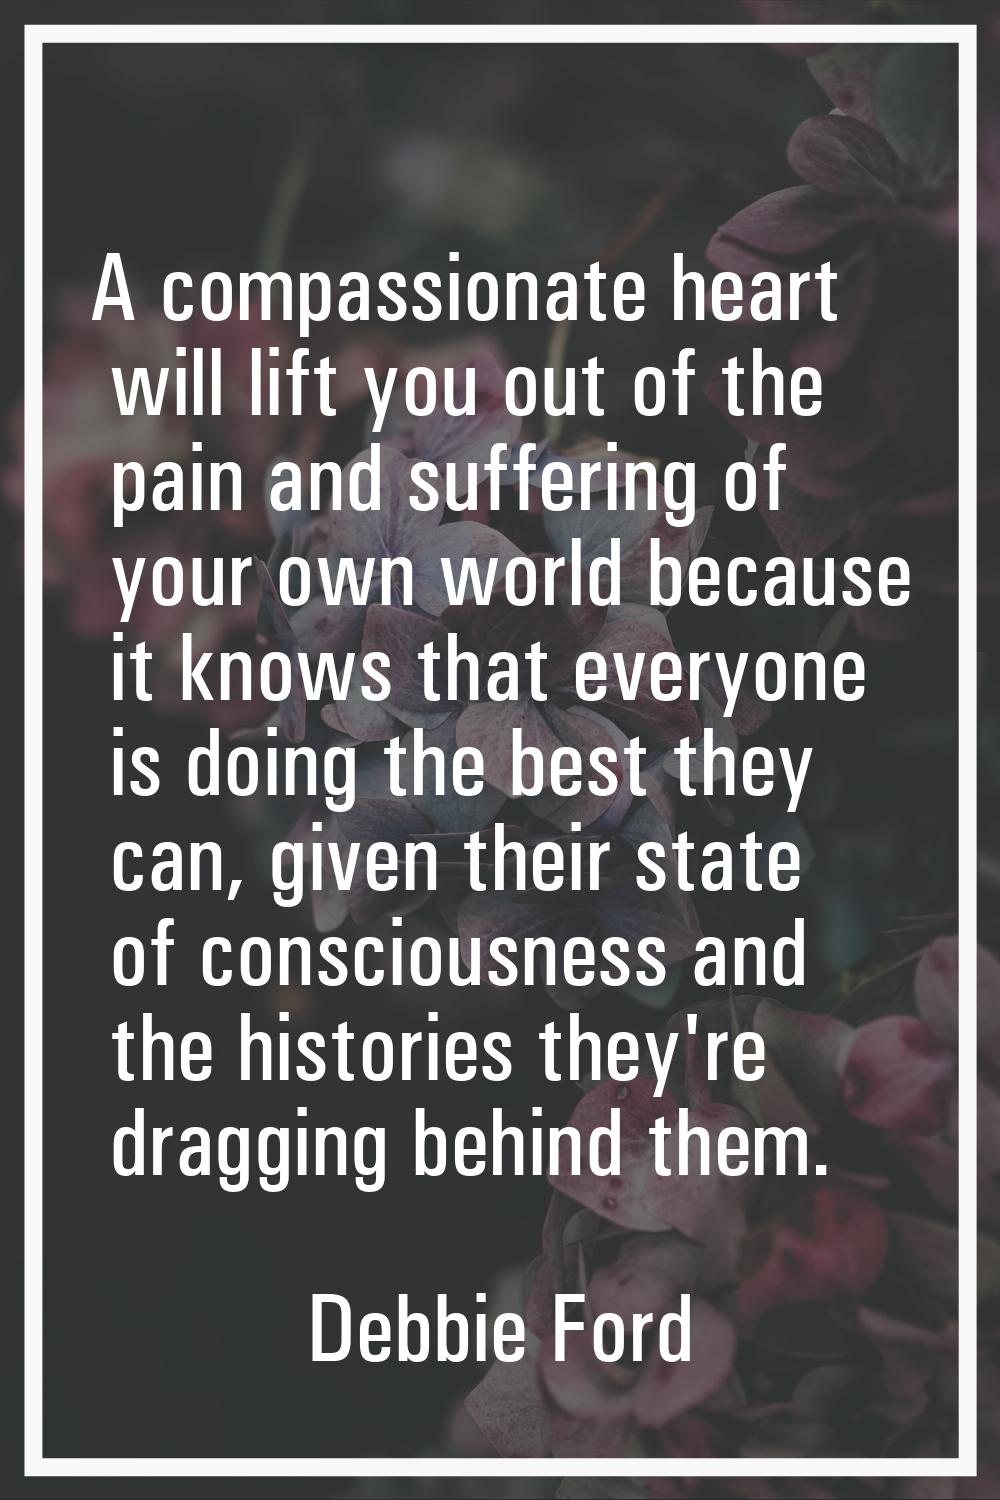 A compassionate heart will lift you out of the pain and suffering of your own world because it know